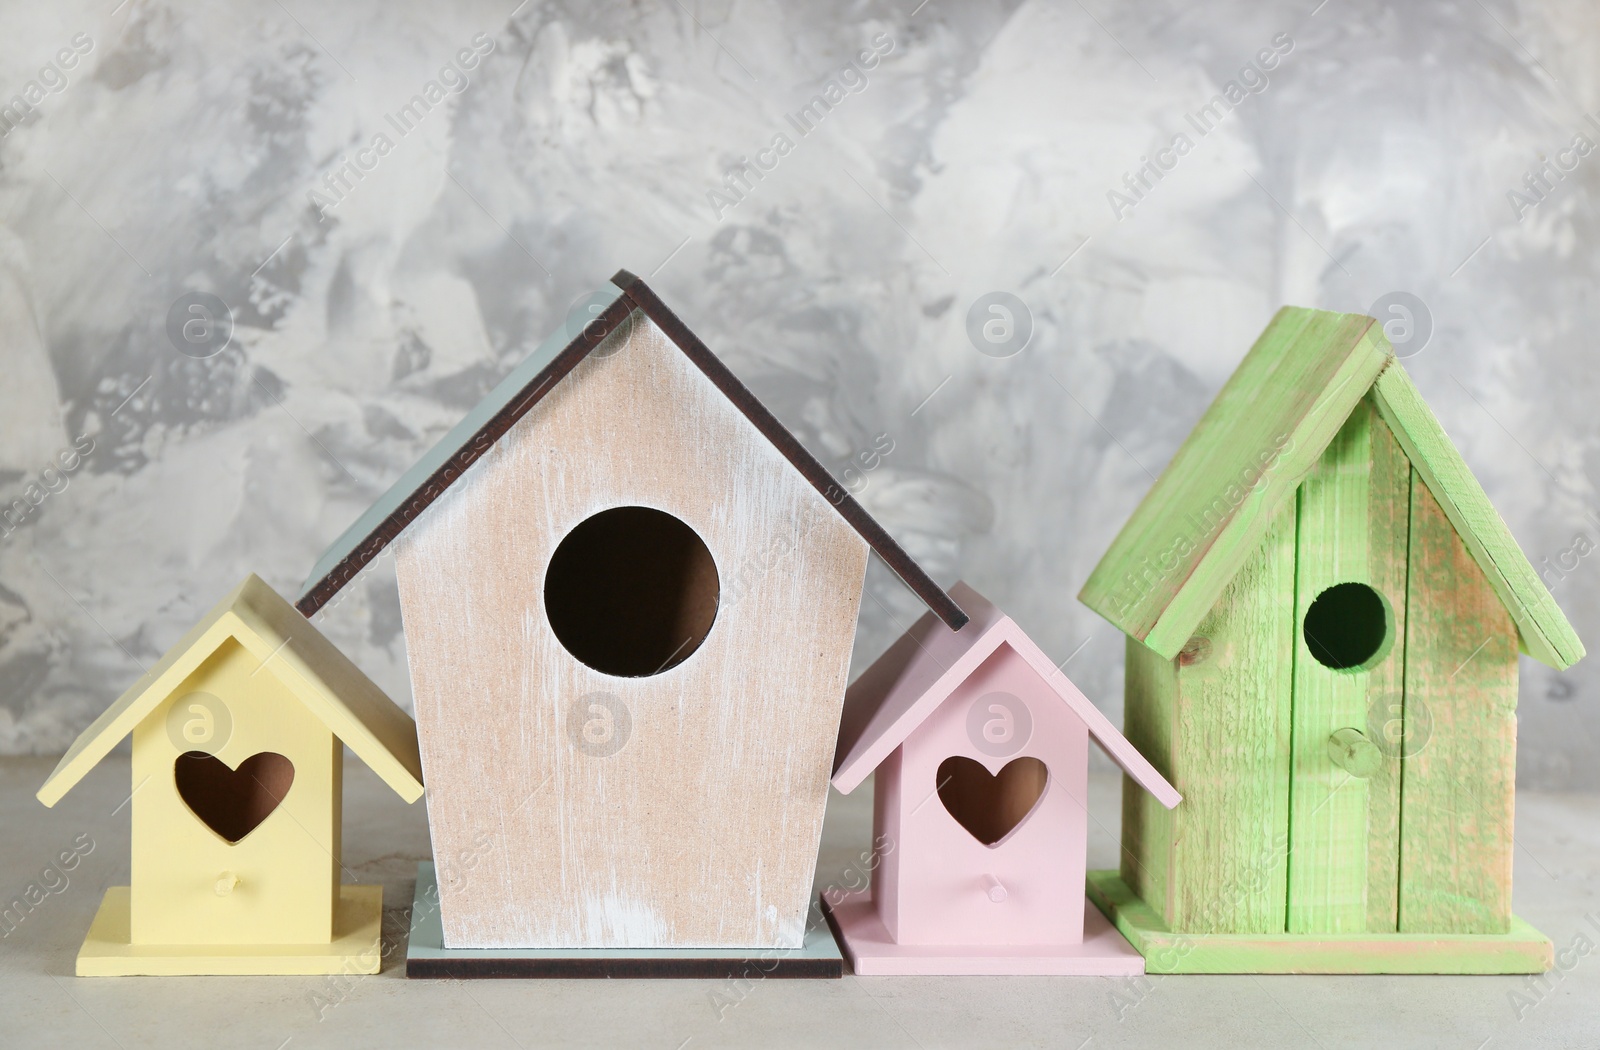 Photo of Collection of handmade bird houses on light grey stone background